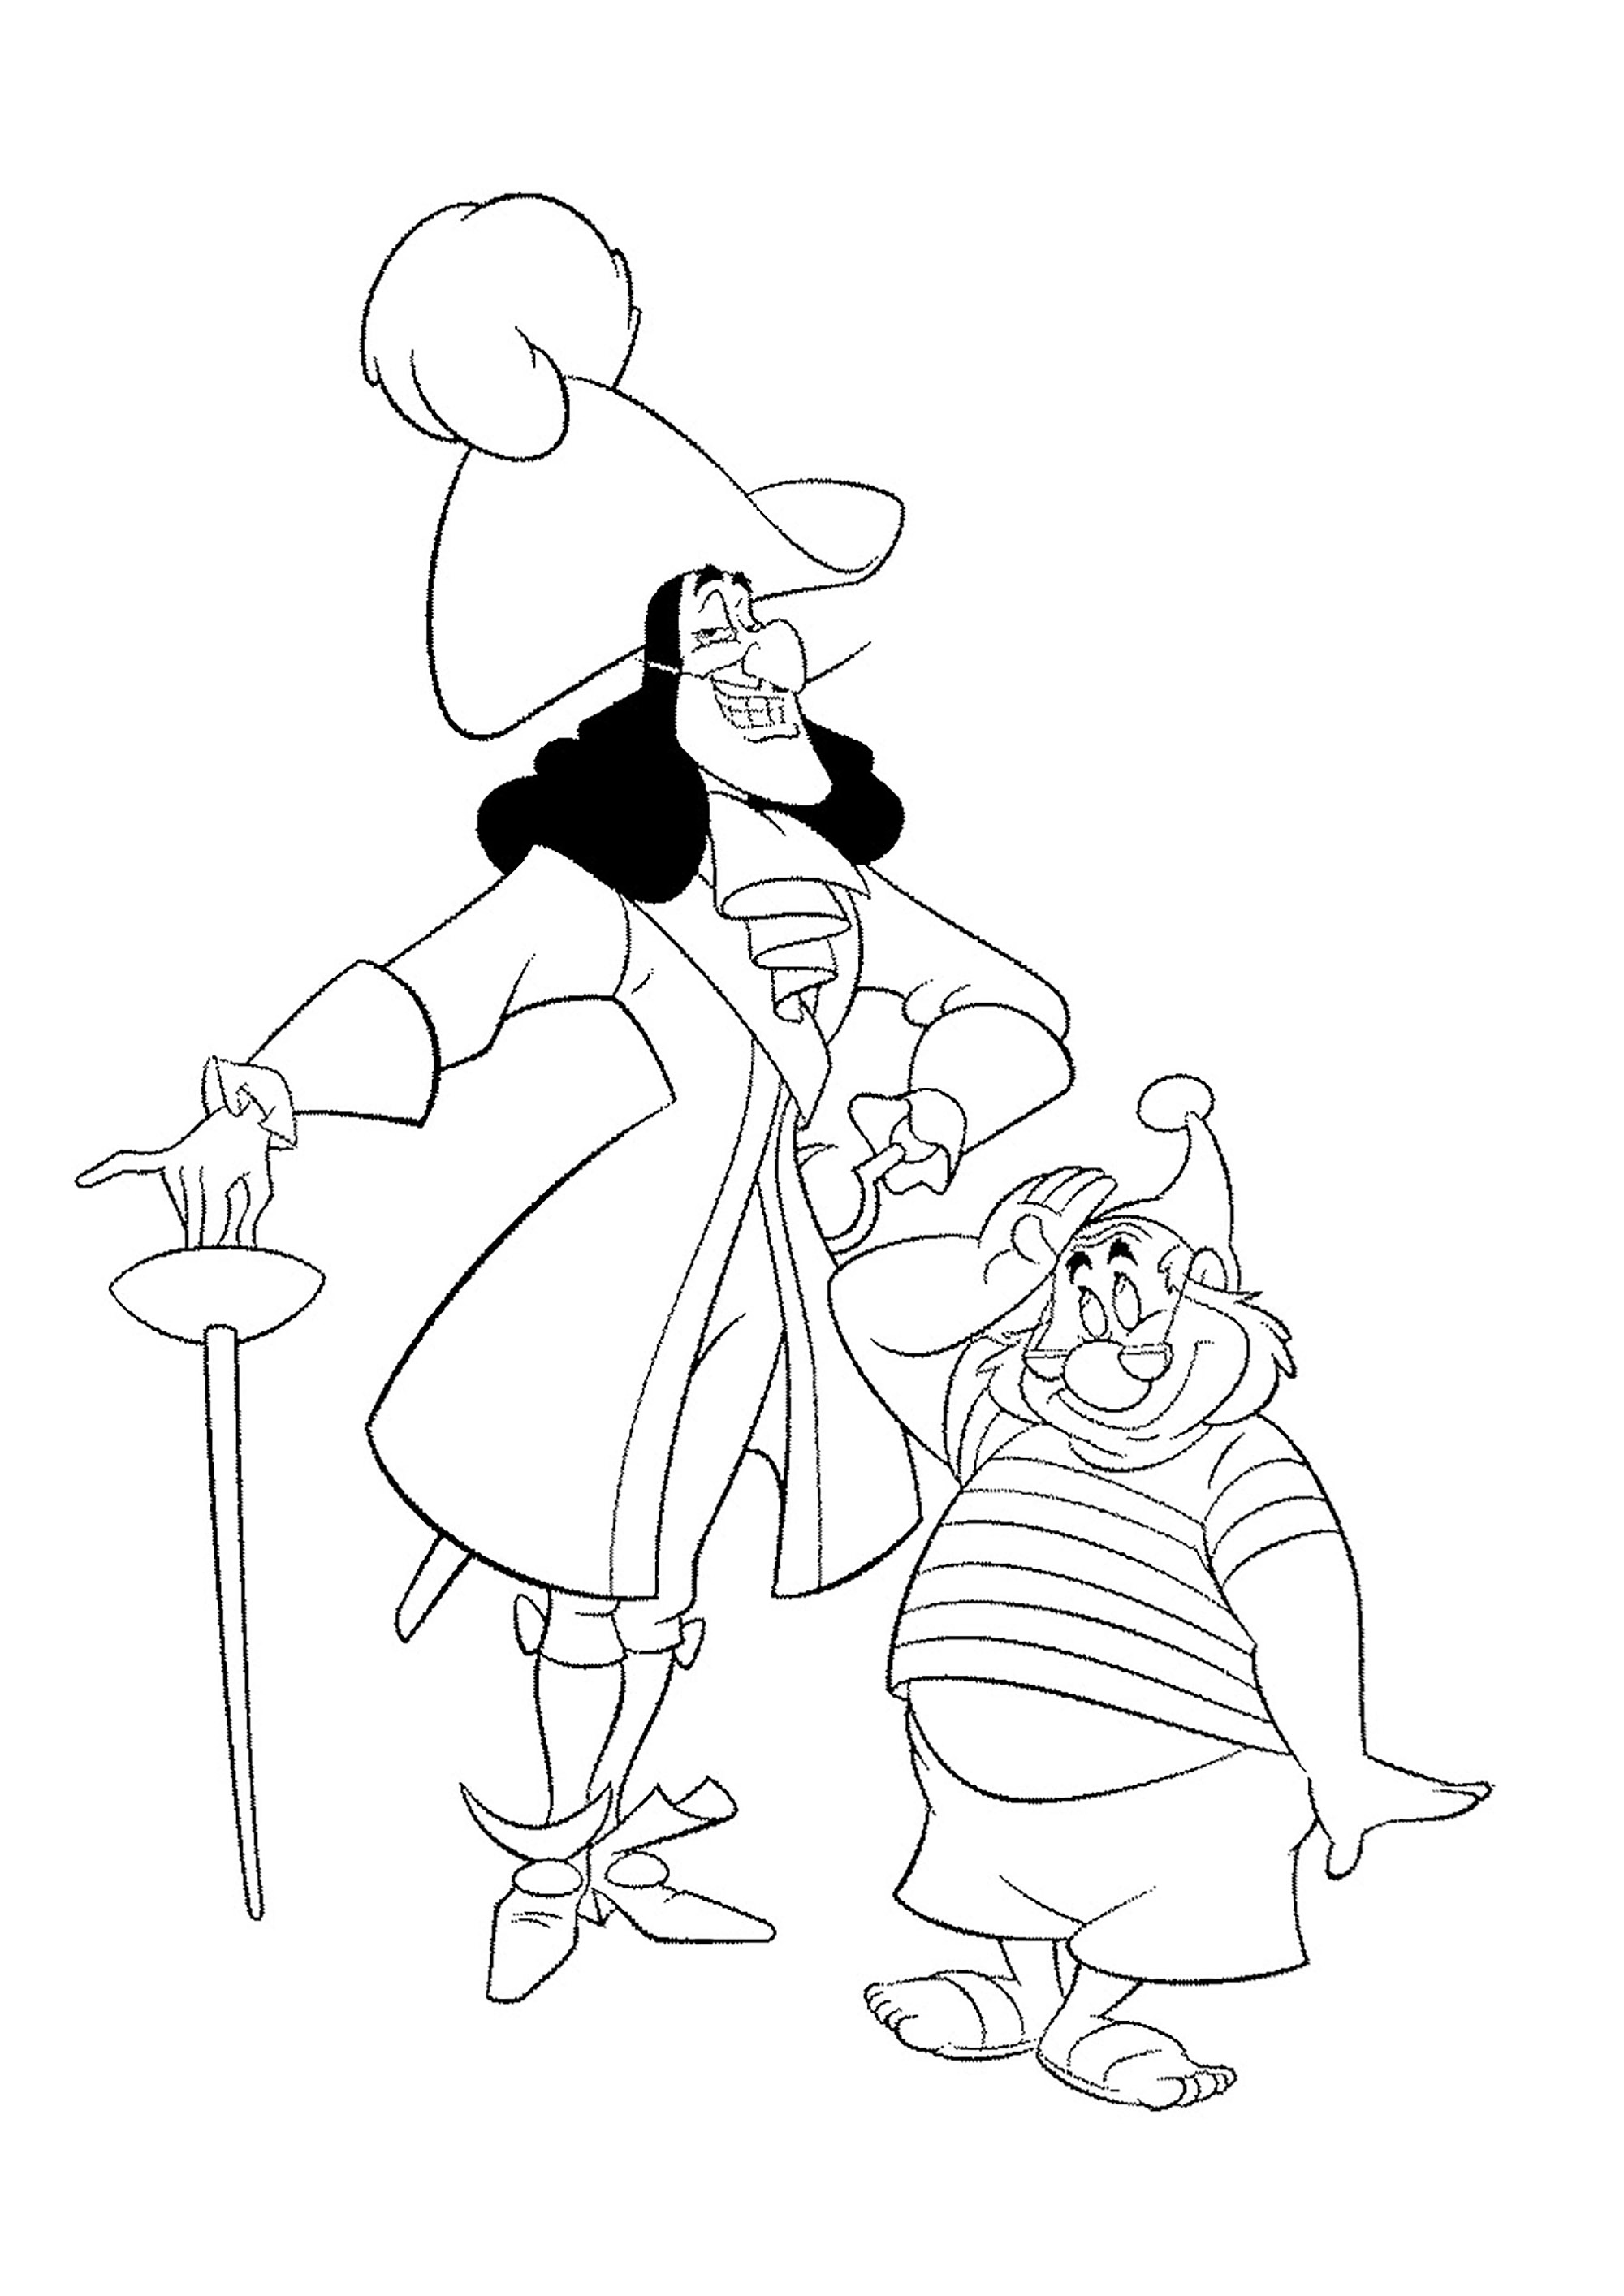 Captain Hook and Mister Smee